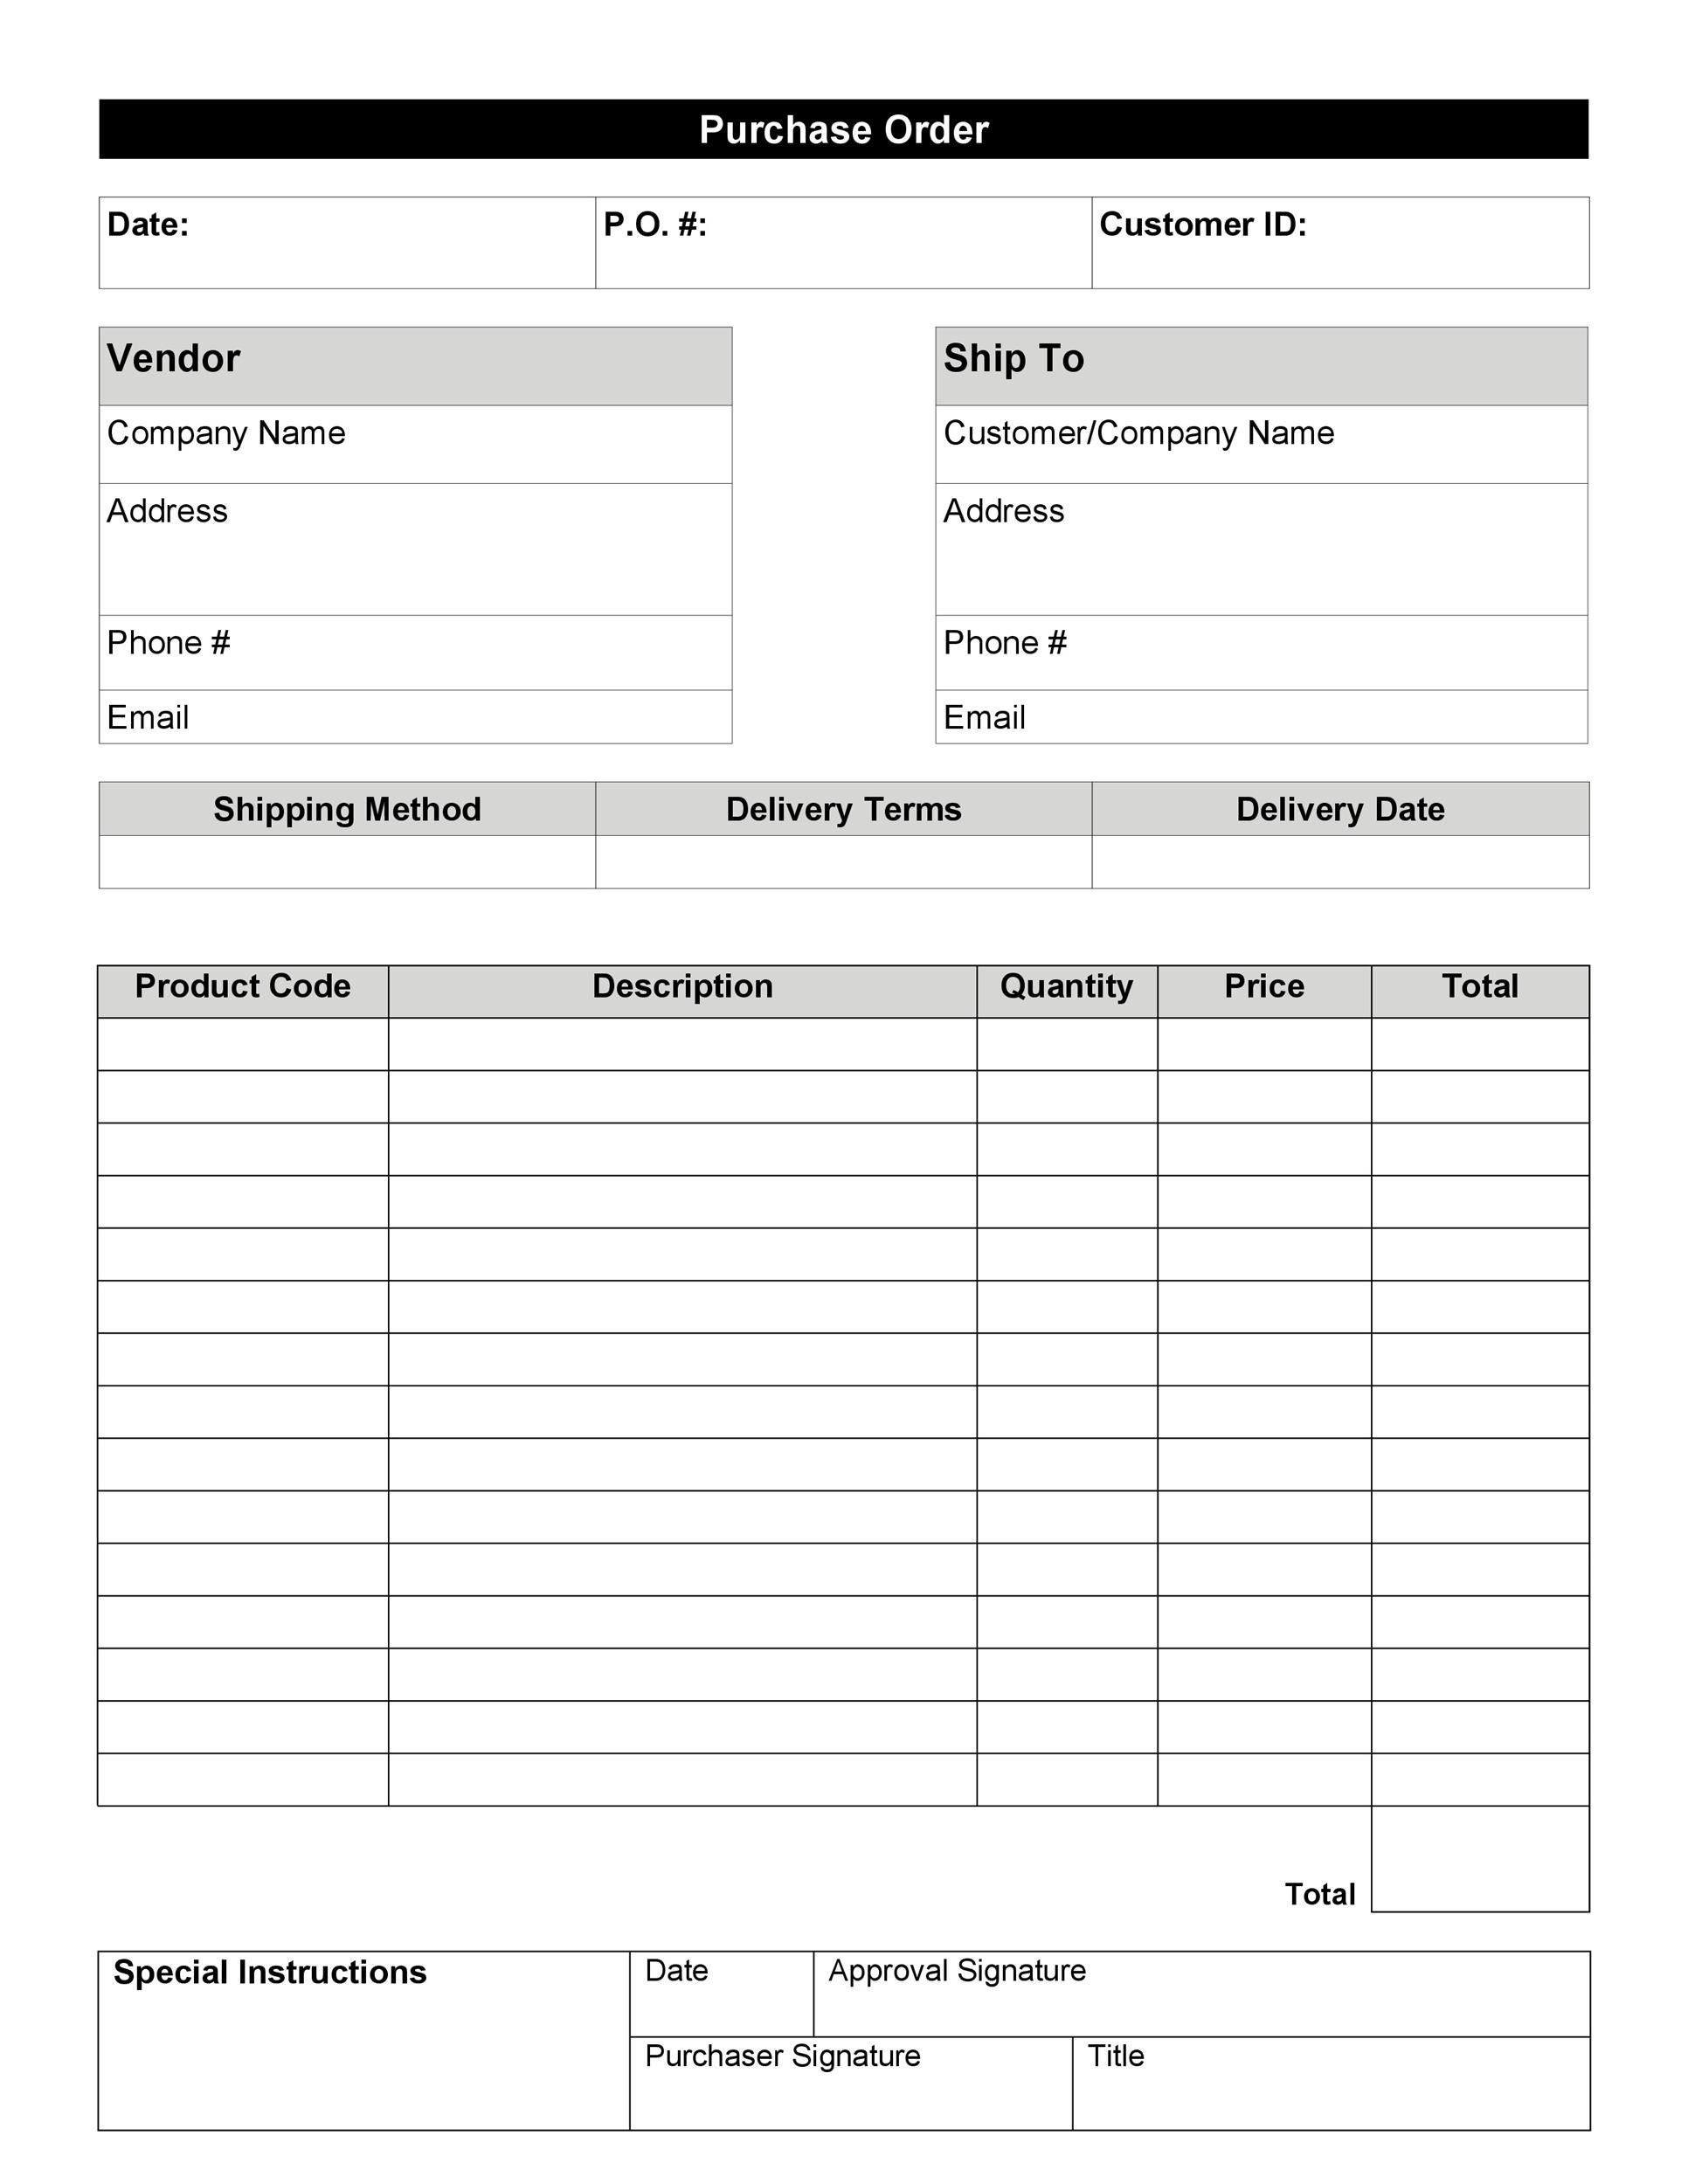 Picture Order Form Template